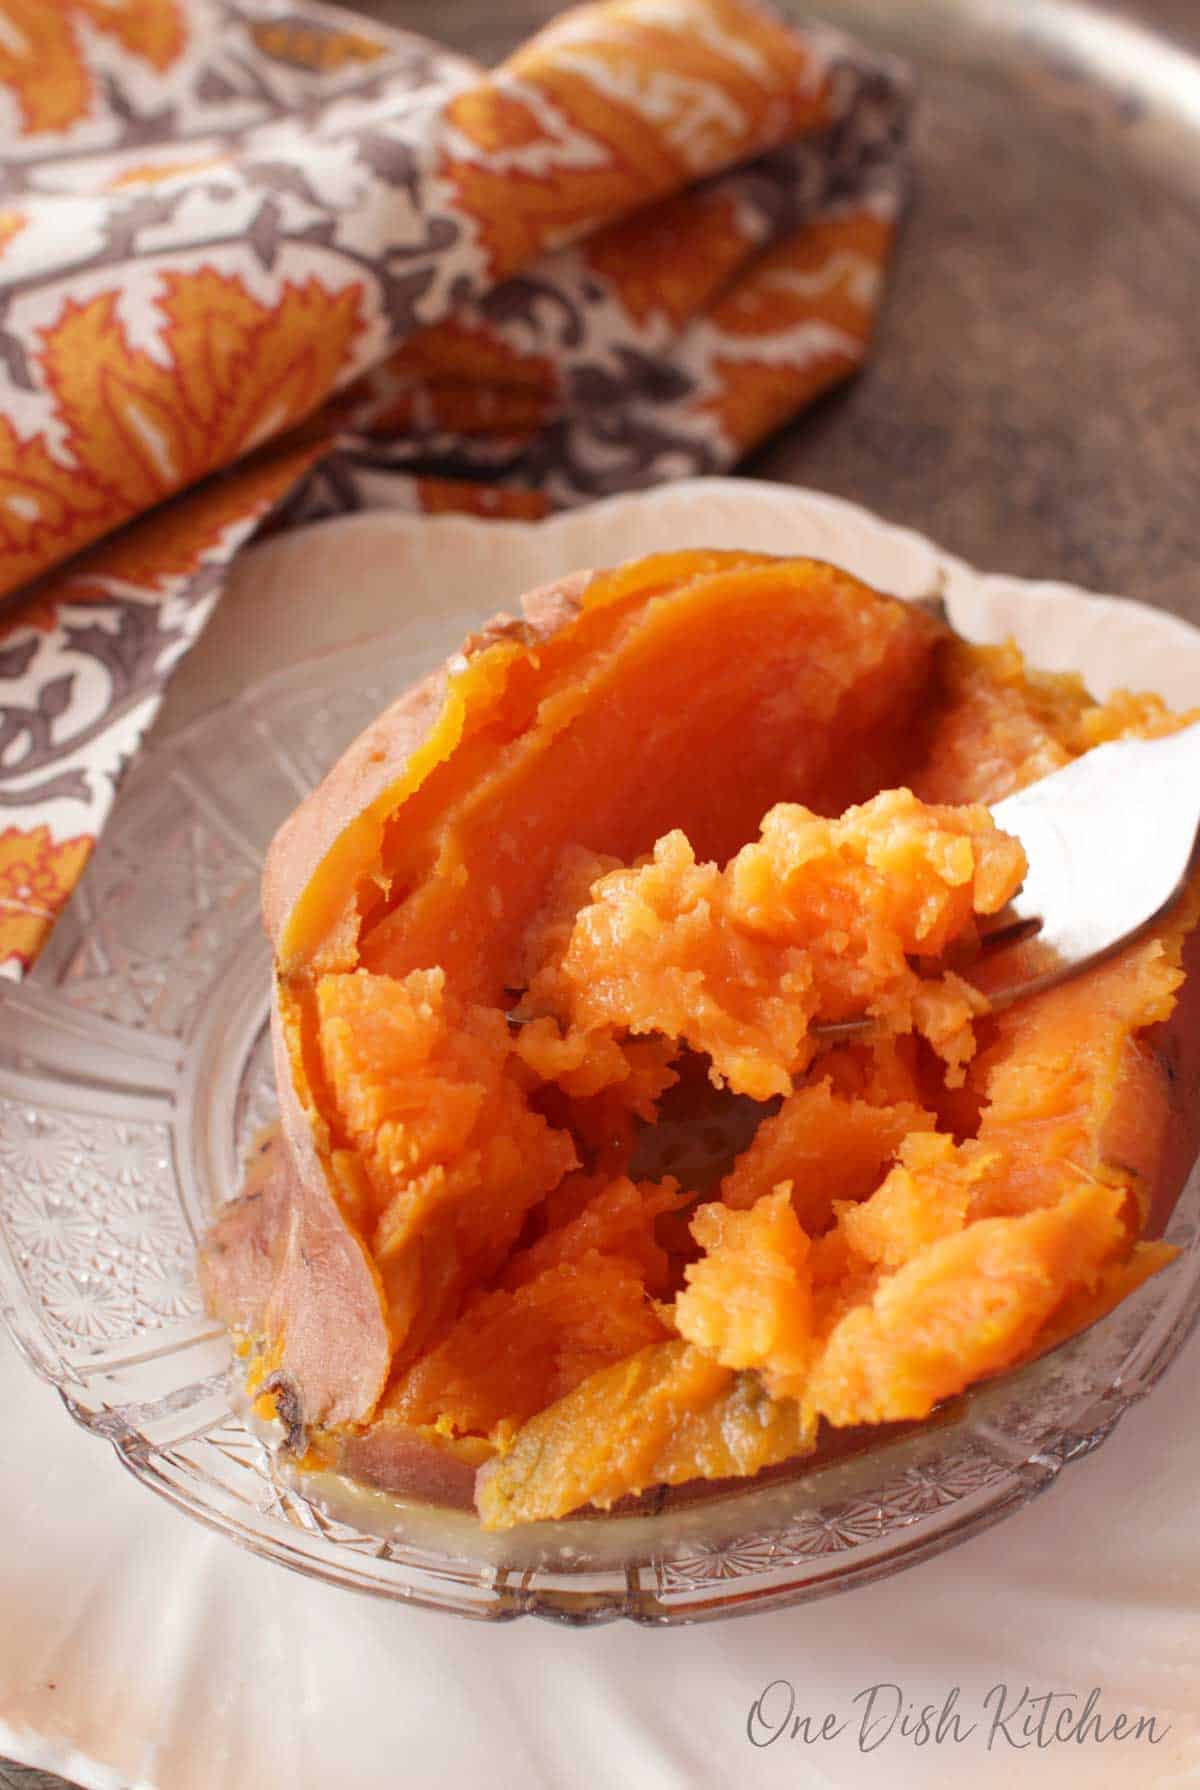 A forkful of a cooked sweet potato plated on a metal tray with a grey and orange cloth napkin.